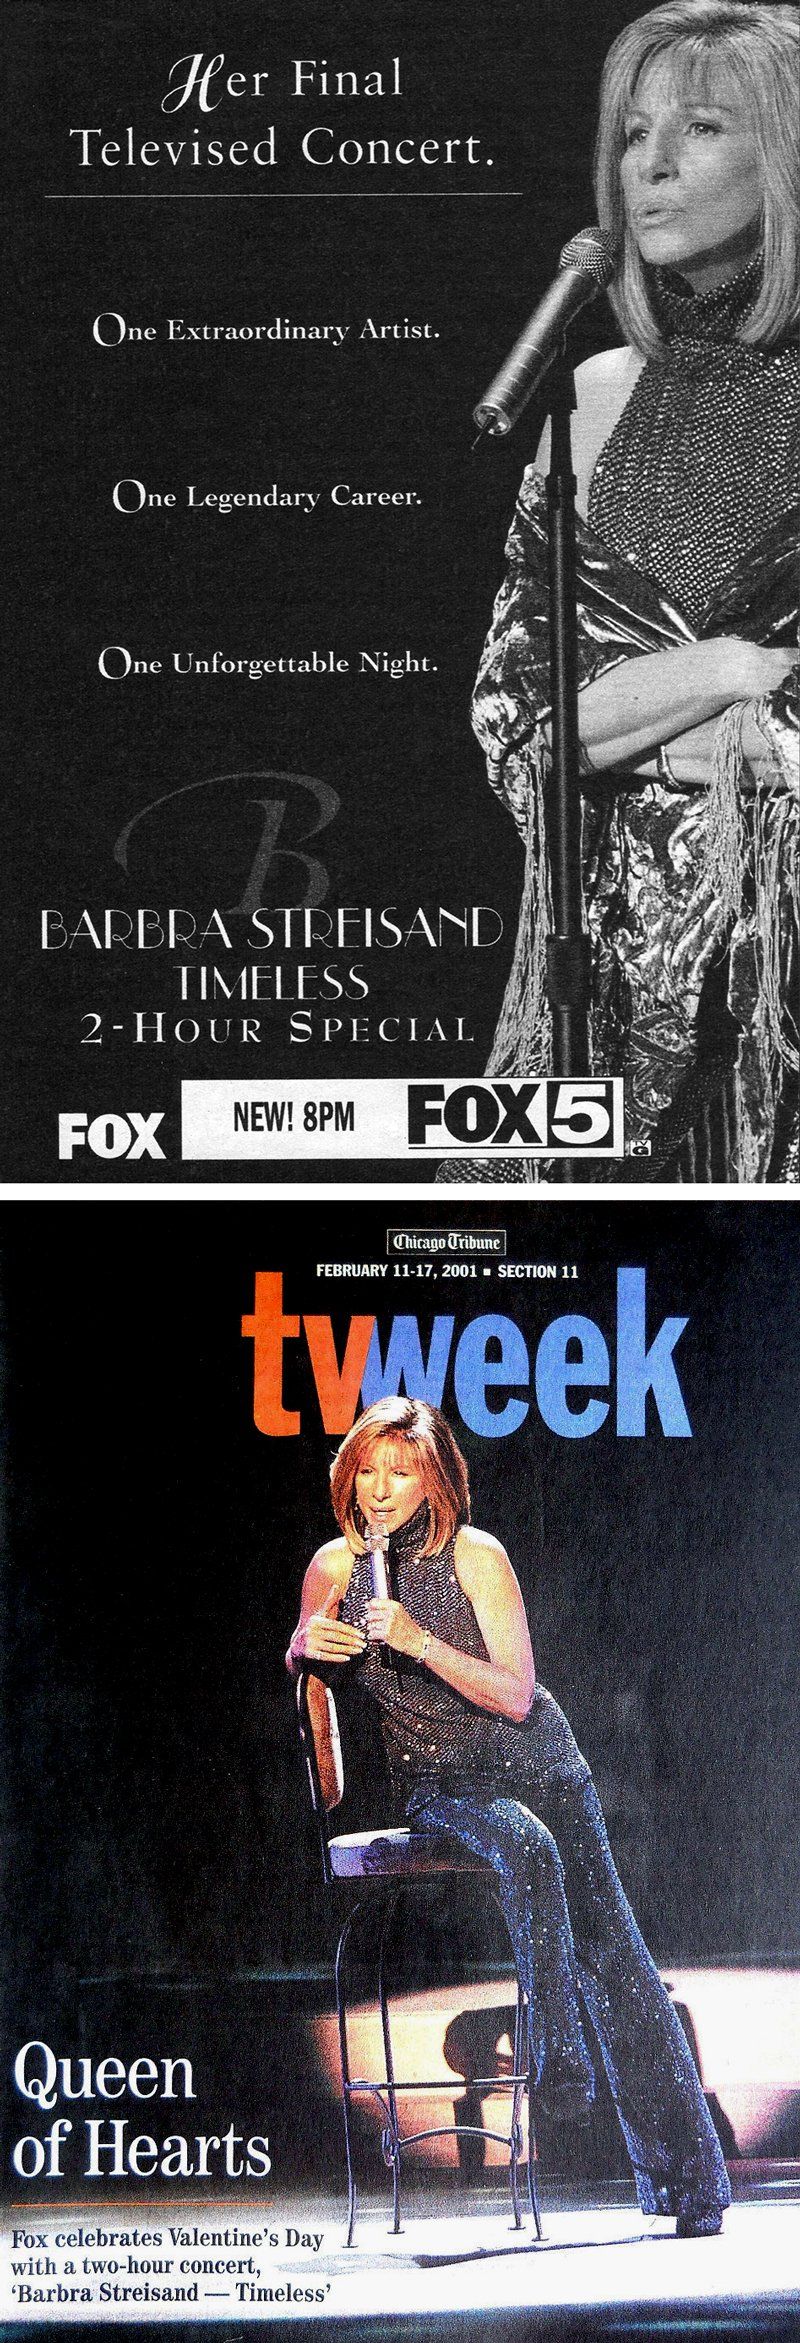 An ad and a TV Week cover for Barbra's 2001 Timeless special on Fox.